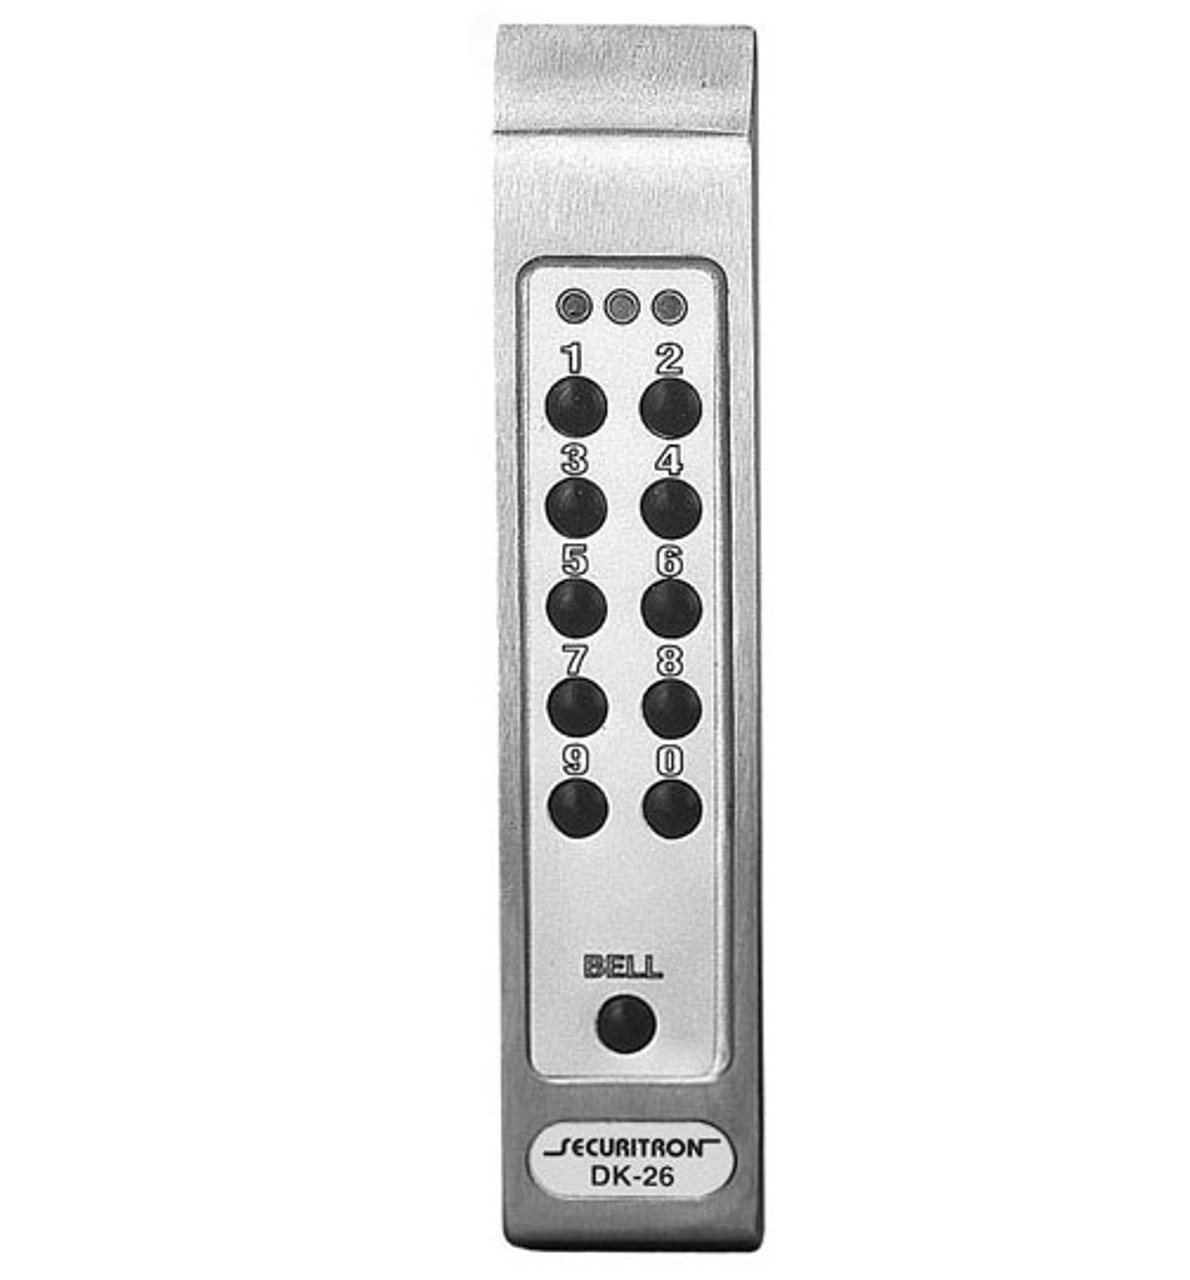 DK-26SS Securitron Digital Keypad for narrow Stile in Stainless